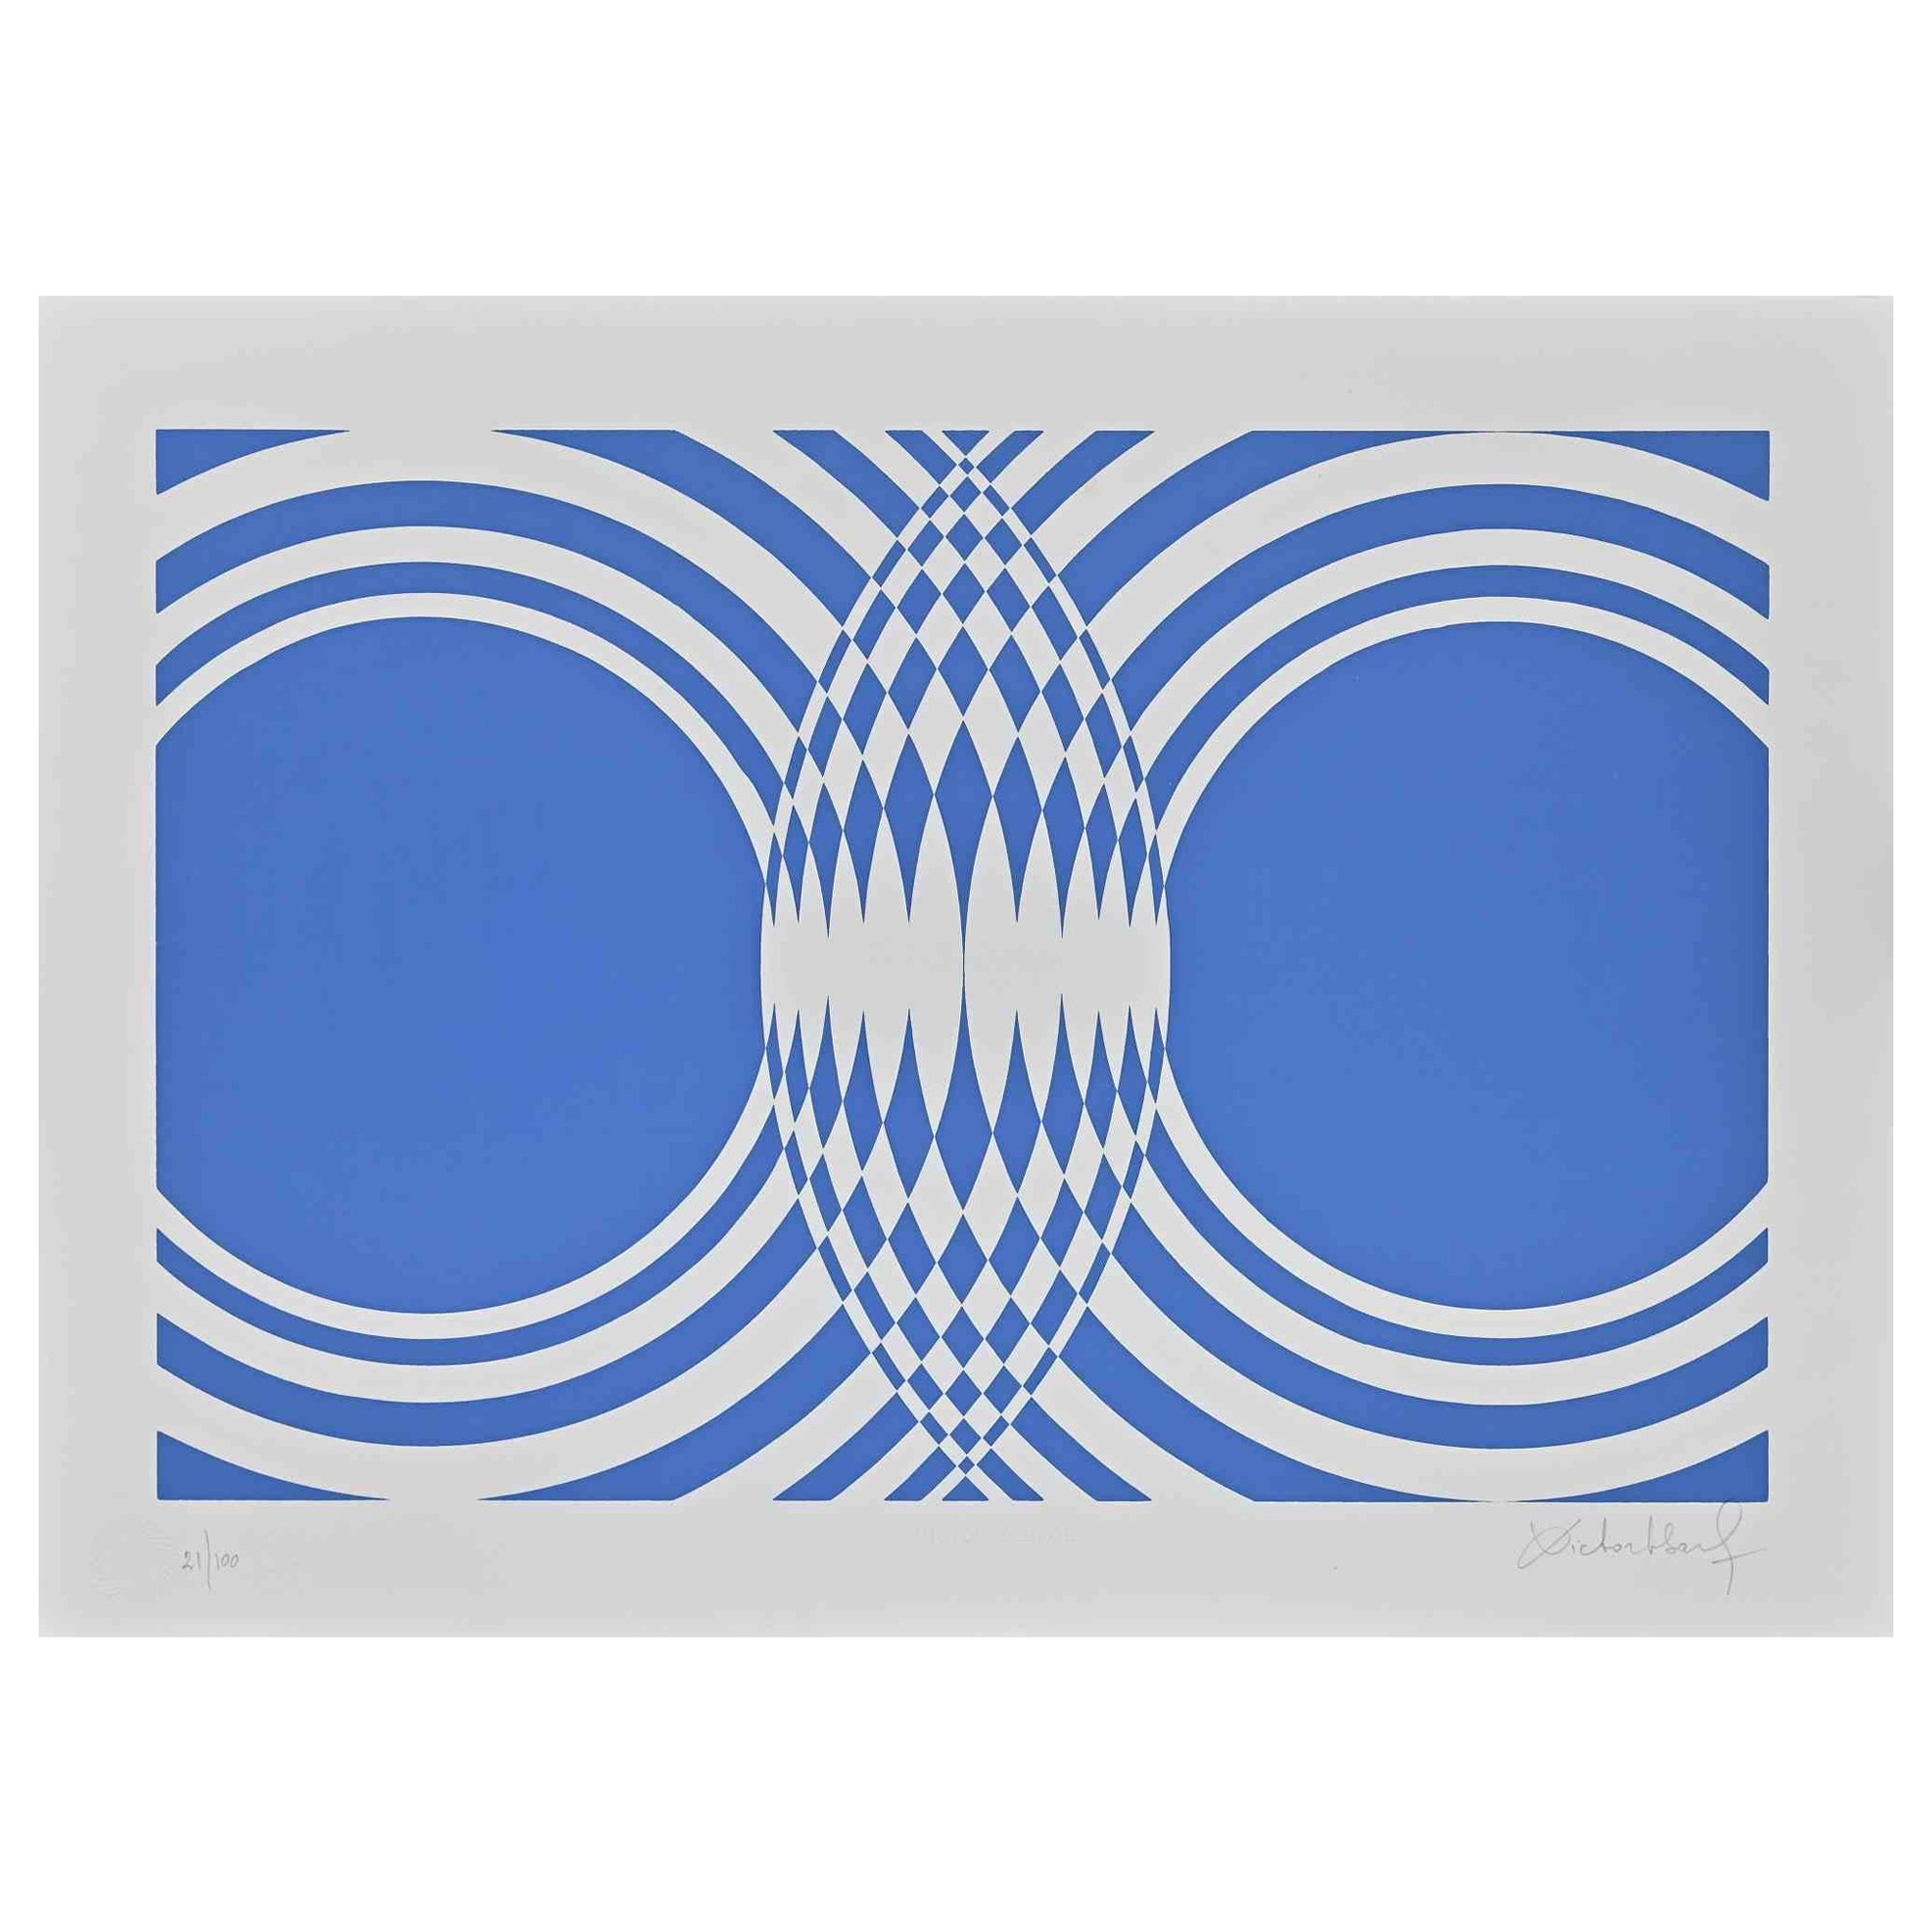 Blue Composition is an original contemporary artwork realized by Victor Debach in the 1970s.

Mixed colored screen print on paper.

Hand signed on the lower right margin.

Numbered on the lower left.

Edition of 21/100